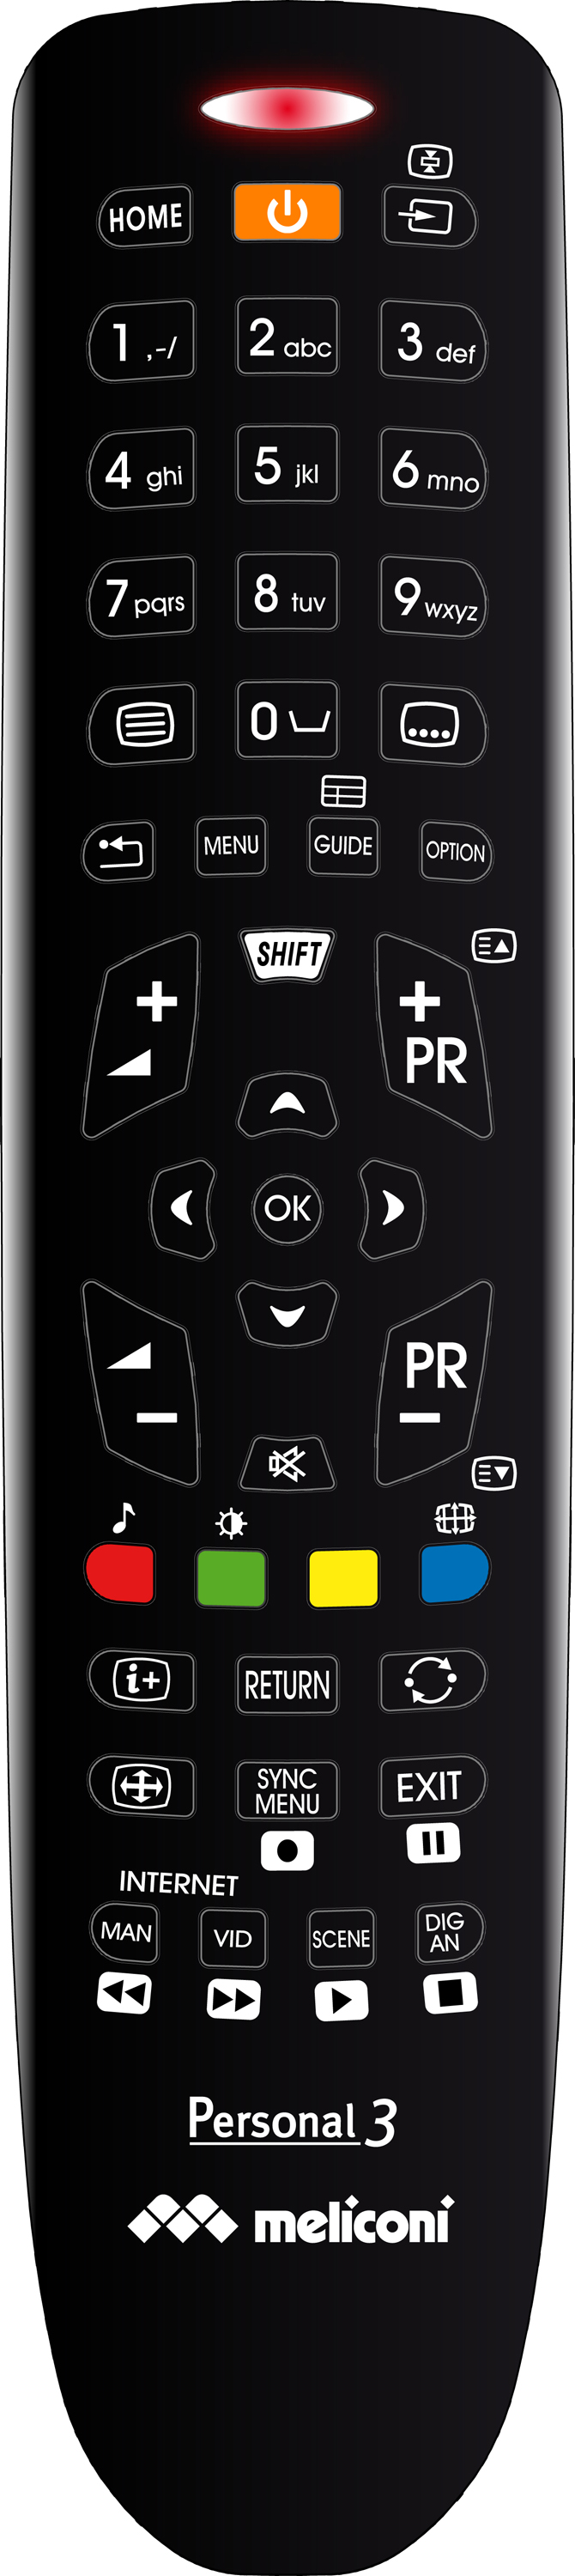 Gumbody personal 3, universal remote control Sony tv ready to use rubber body, black